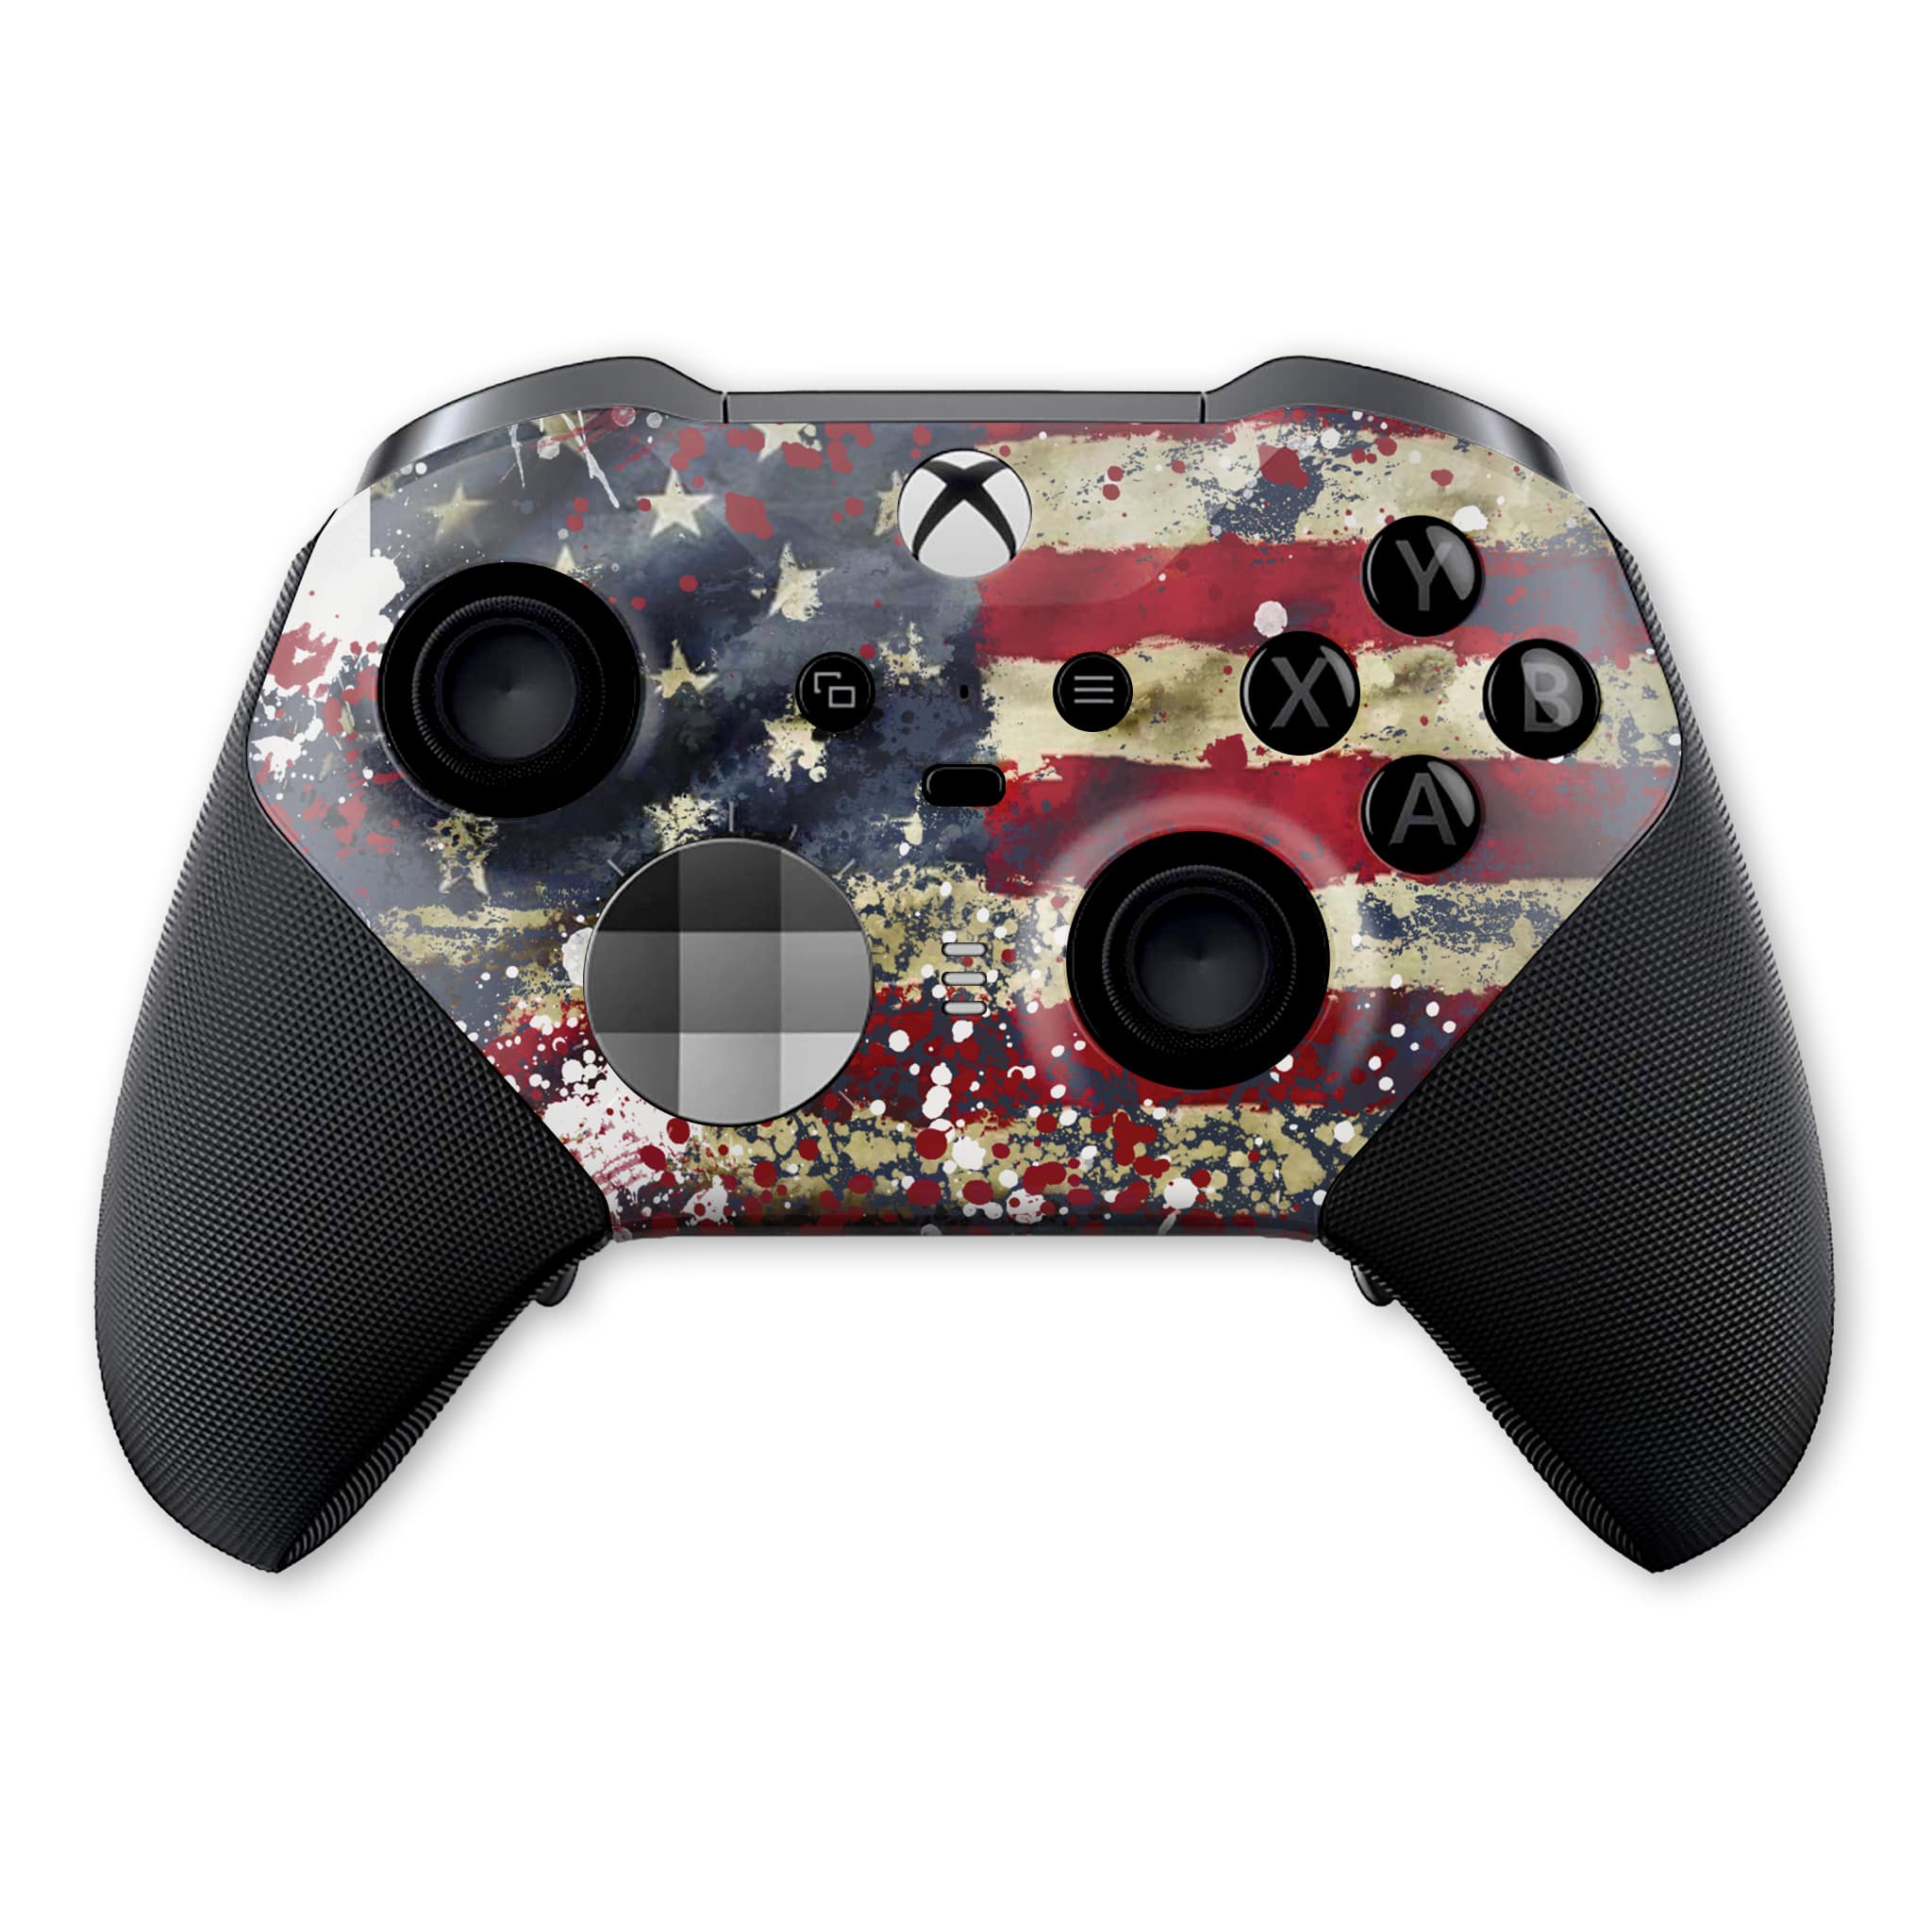 USA Tattered Flag Xbox Elite Series 2 Controller - Dream Controller